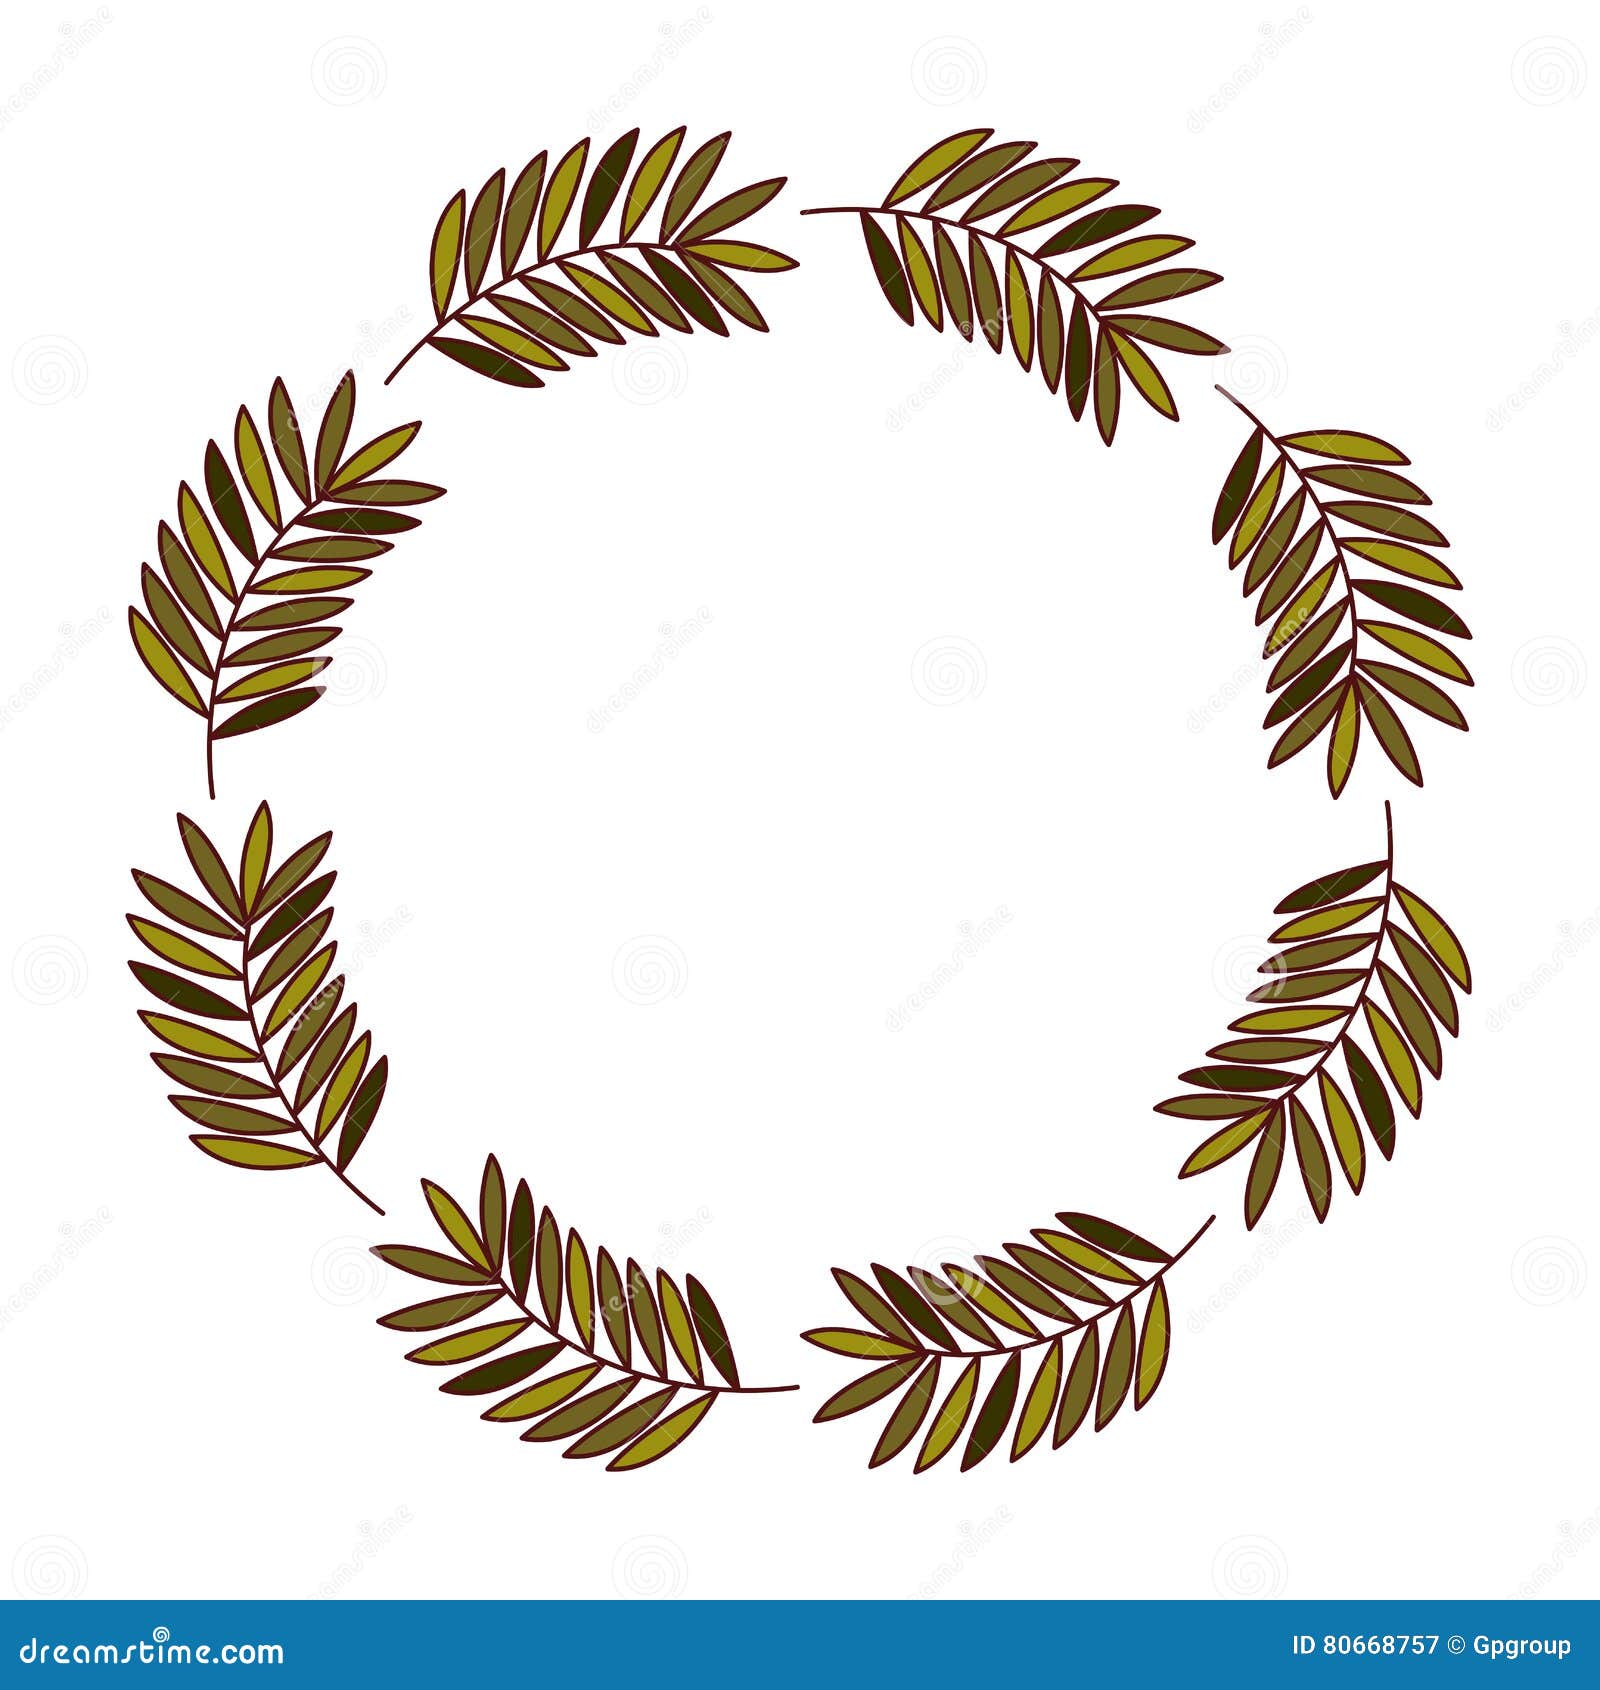 Isolated Leaves Crown Decoration Design Stock Vector - Illustration of ...